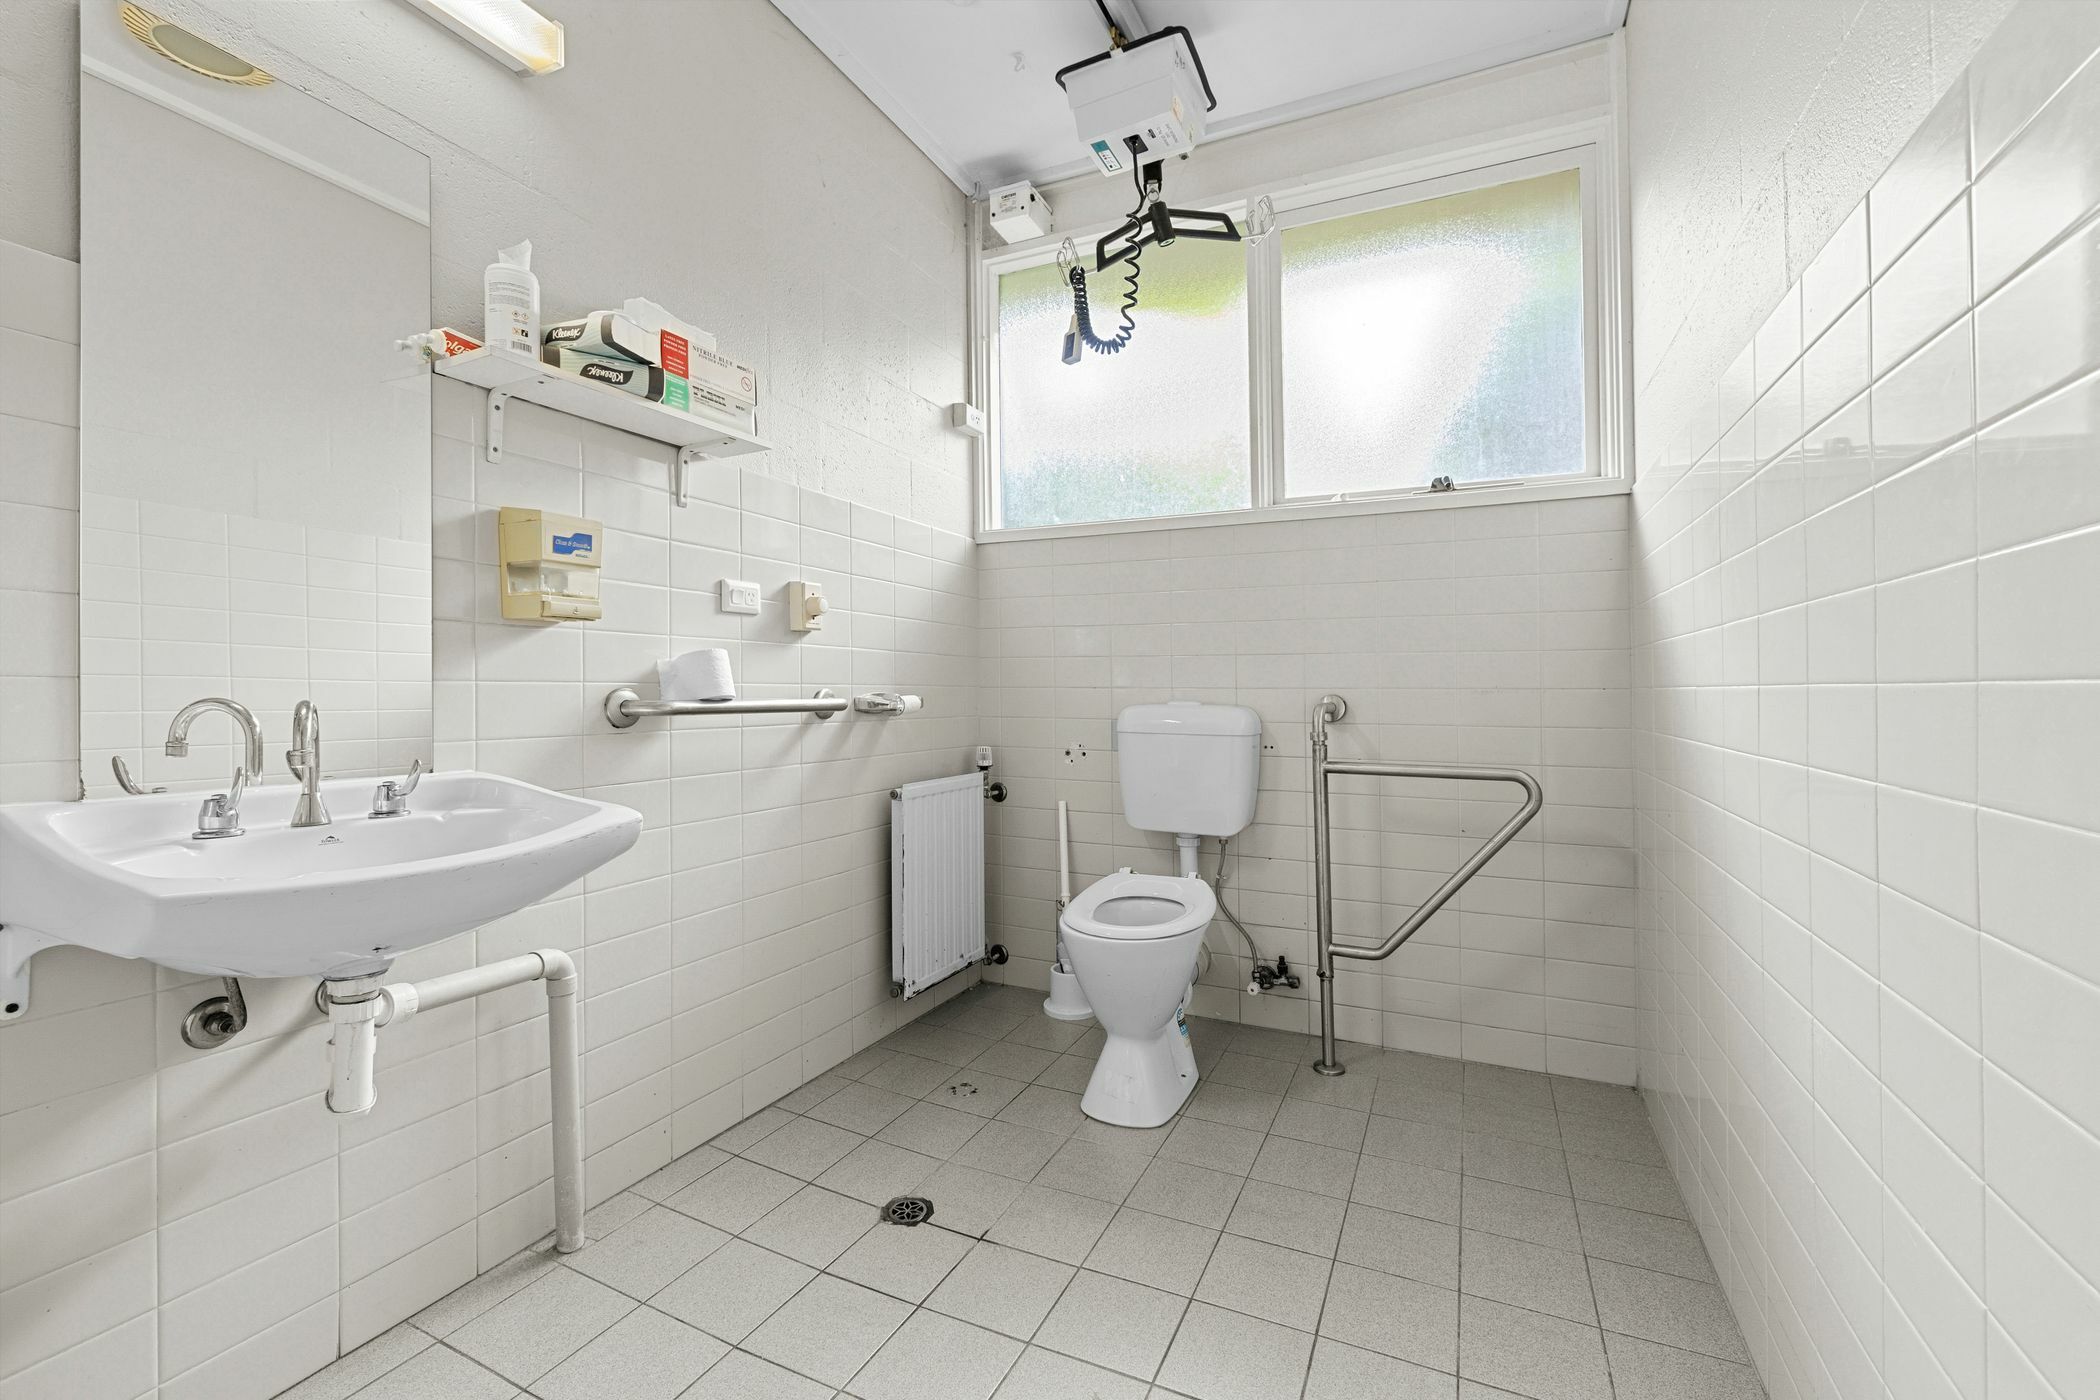 Accessible bathroom with ceiling hoist grab rails and white subway tiles